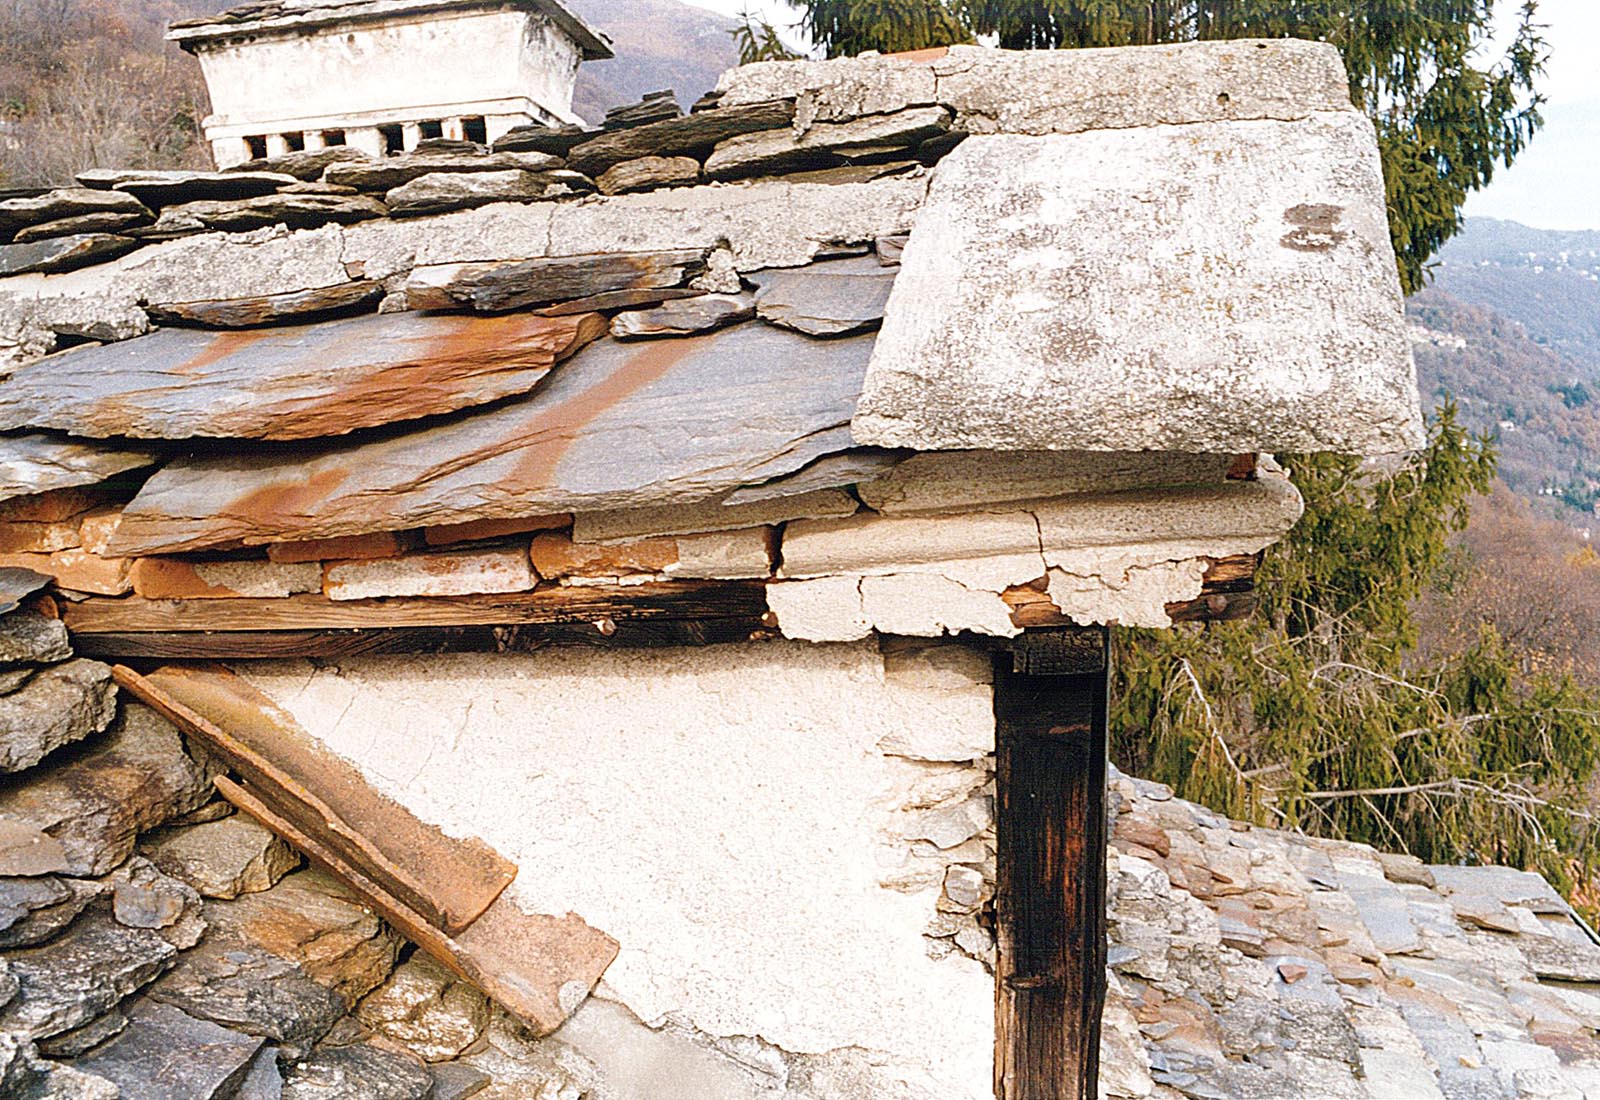 Photo and paper archive “O. Schlemmer” in Oggebbio - Detail of the dormer